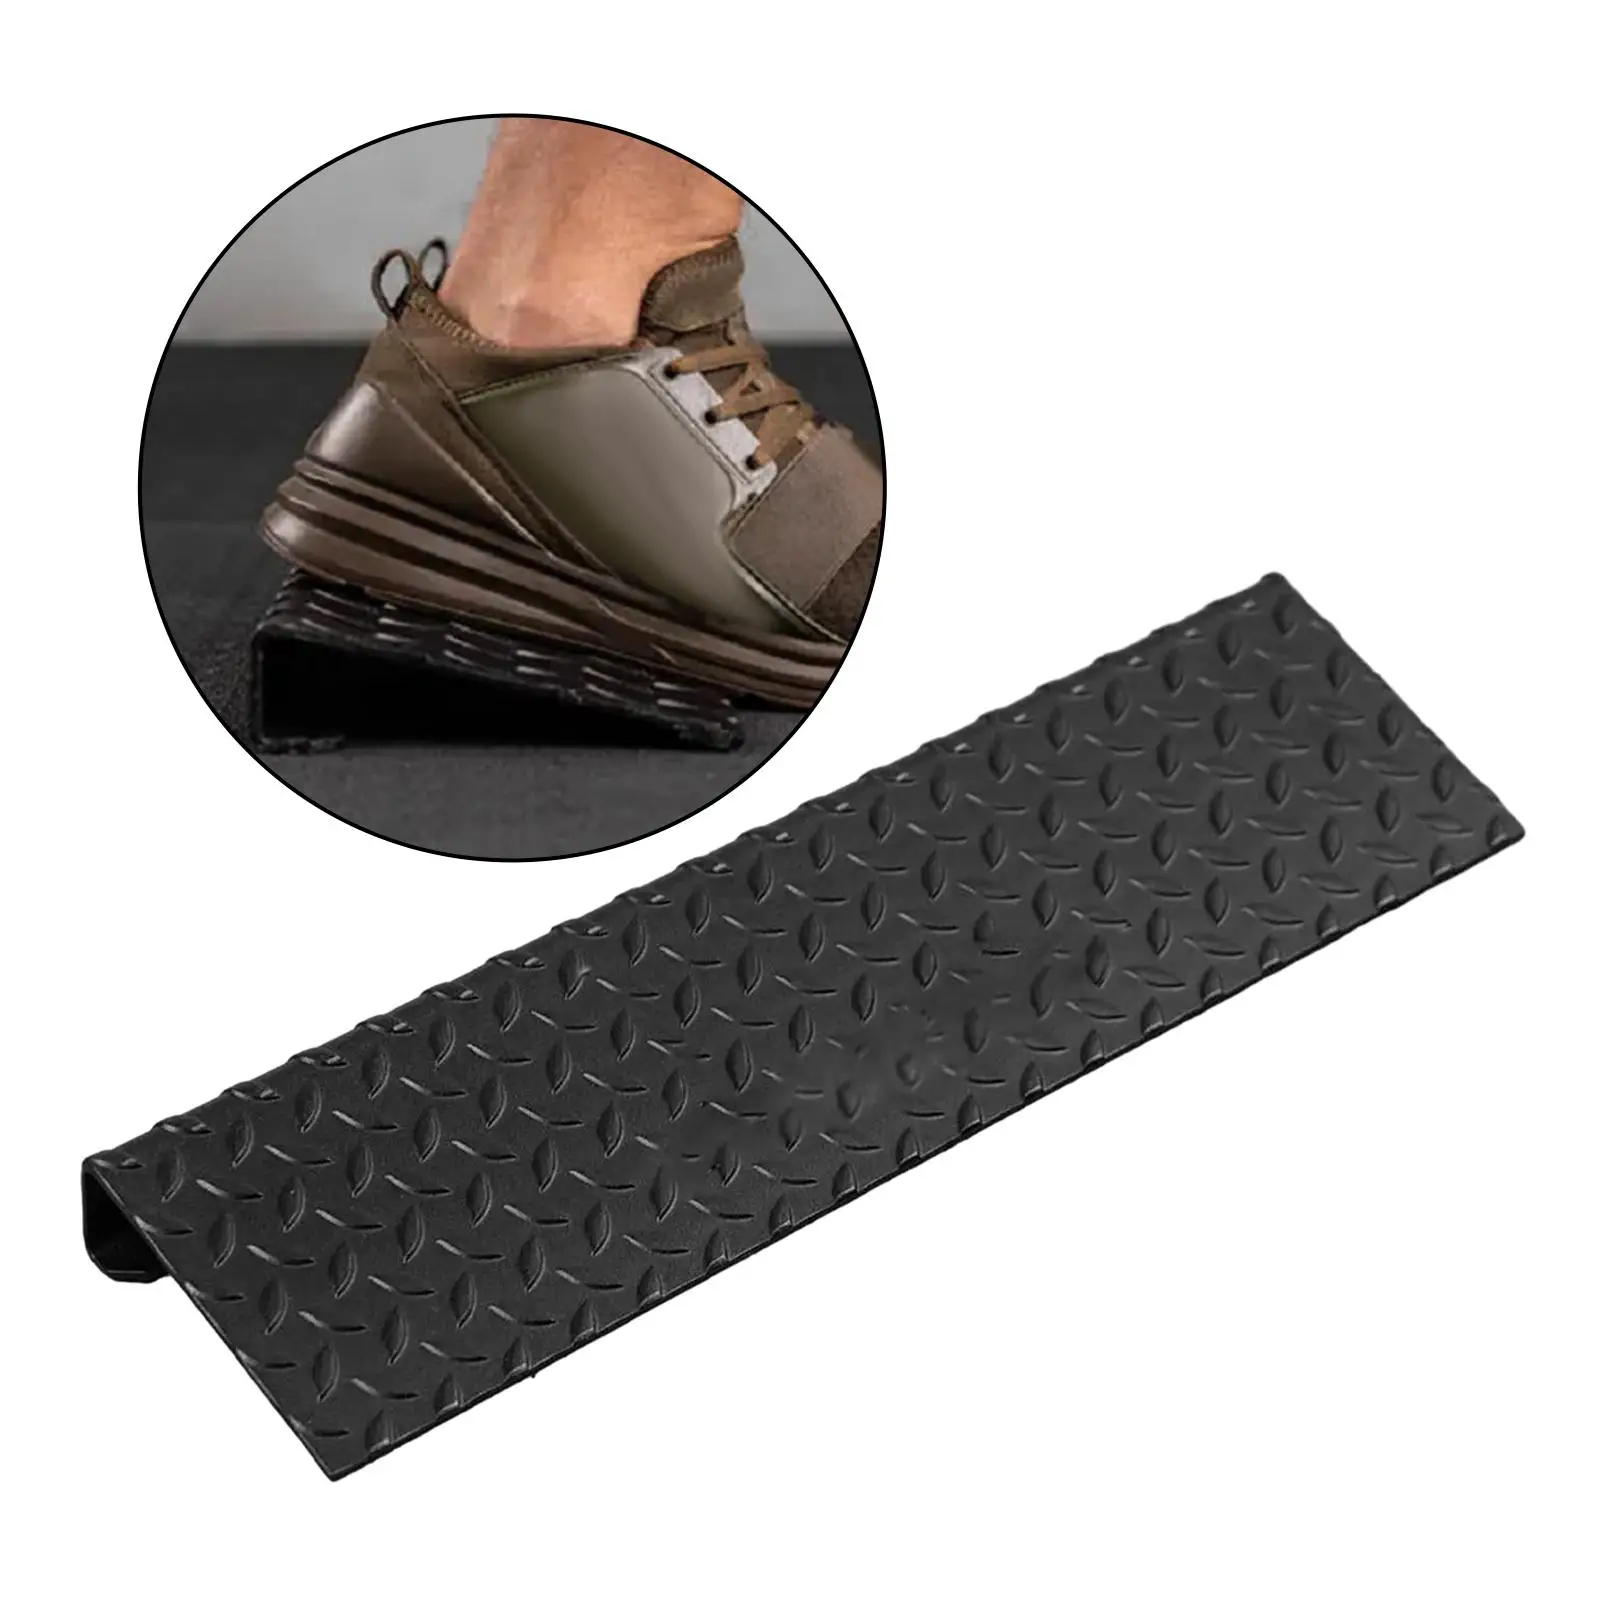 Slant Board Calf Stretcher Professional Gym Fitness Leg Stretch Metal Ankle Foot Squats Squat Wedge Ankle and Foot Incline Board